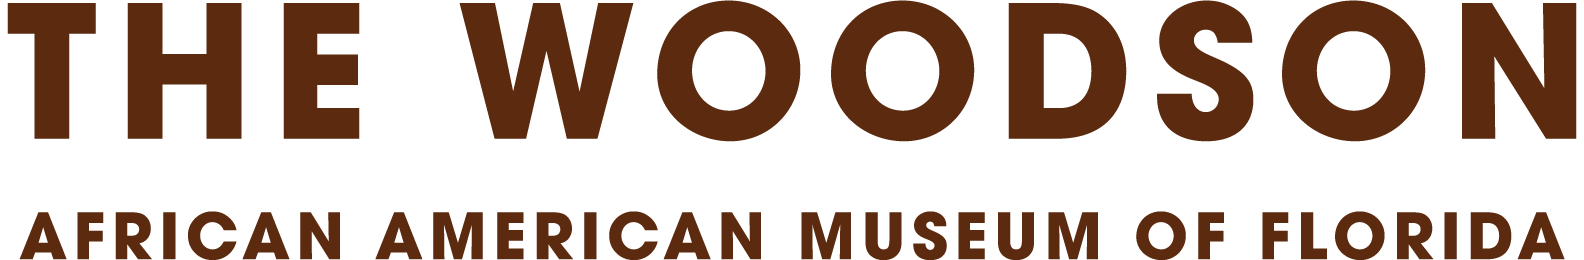 The Woodson African American Museum of Florida | Logo